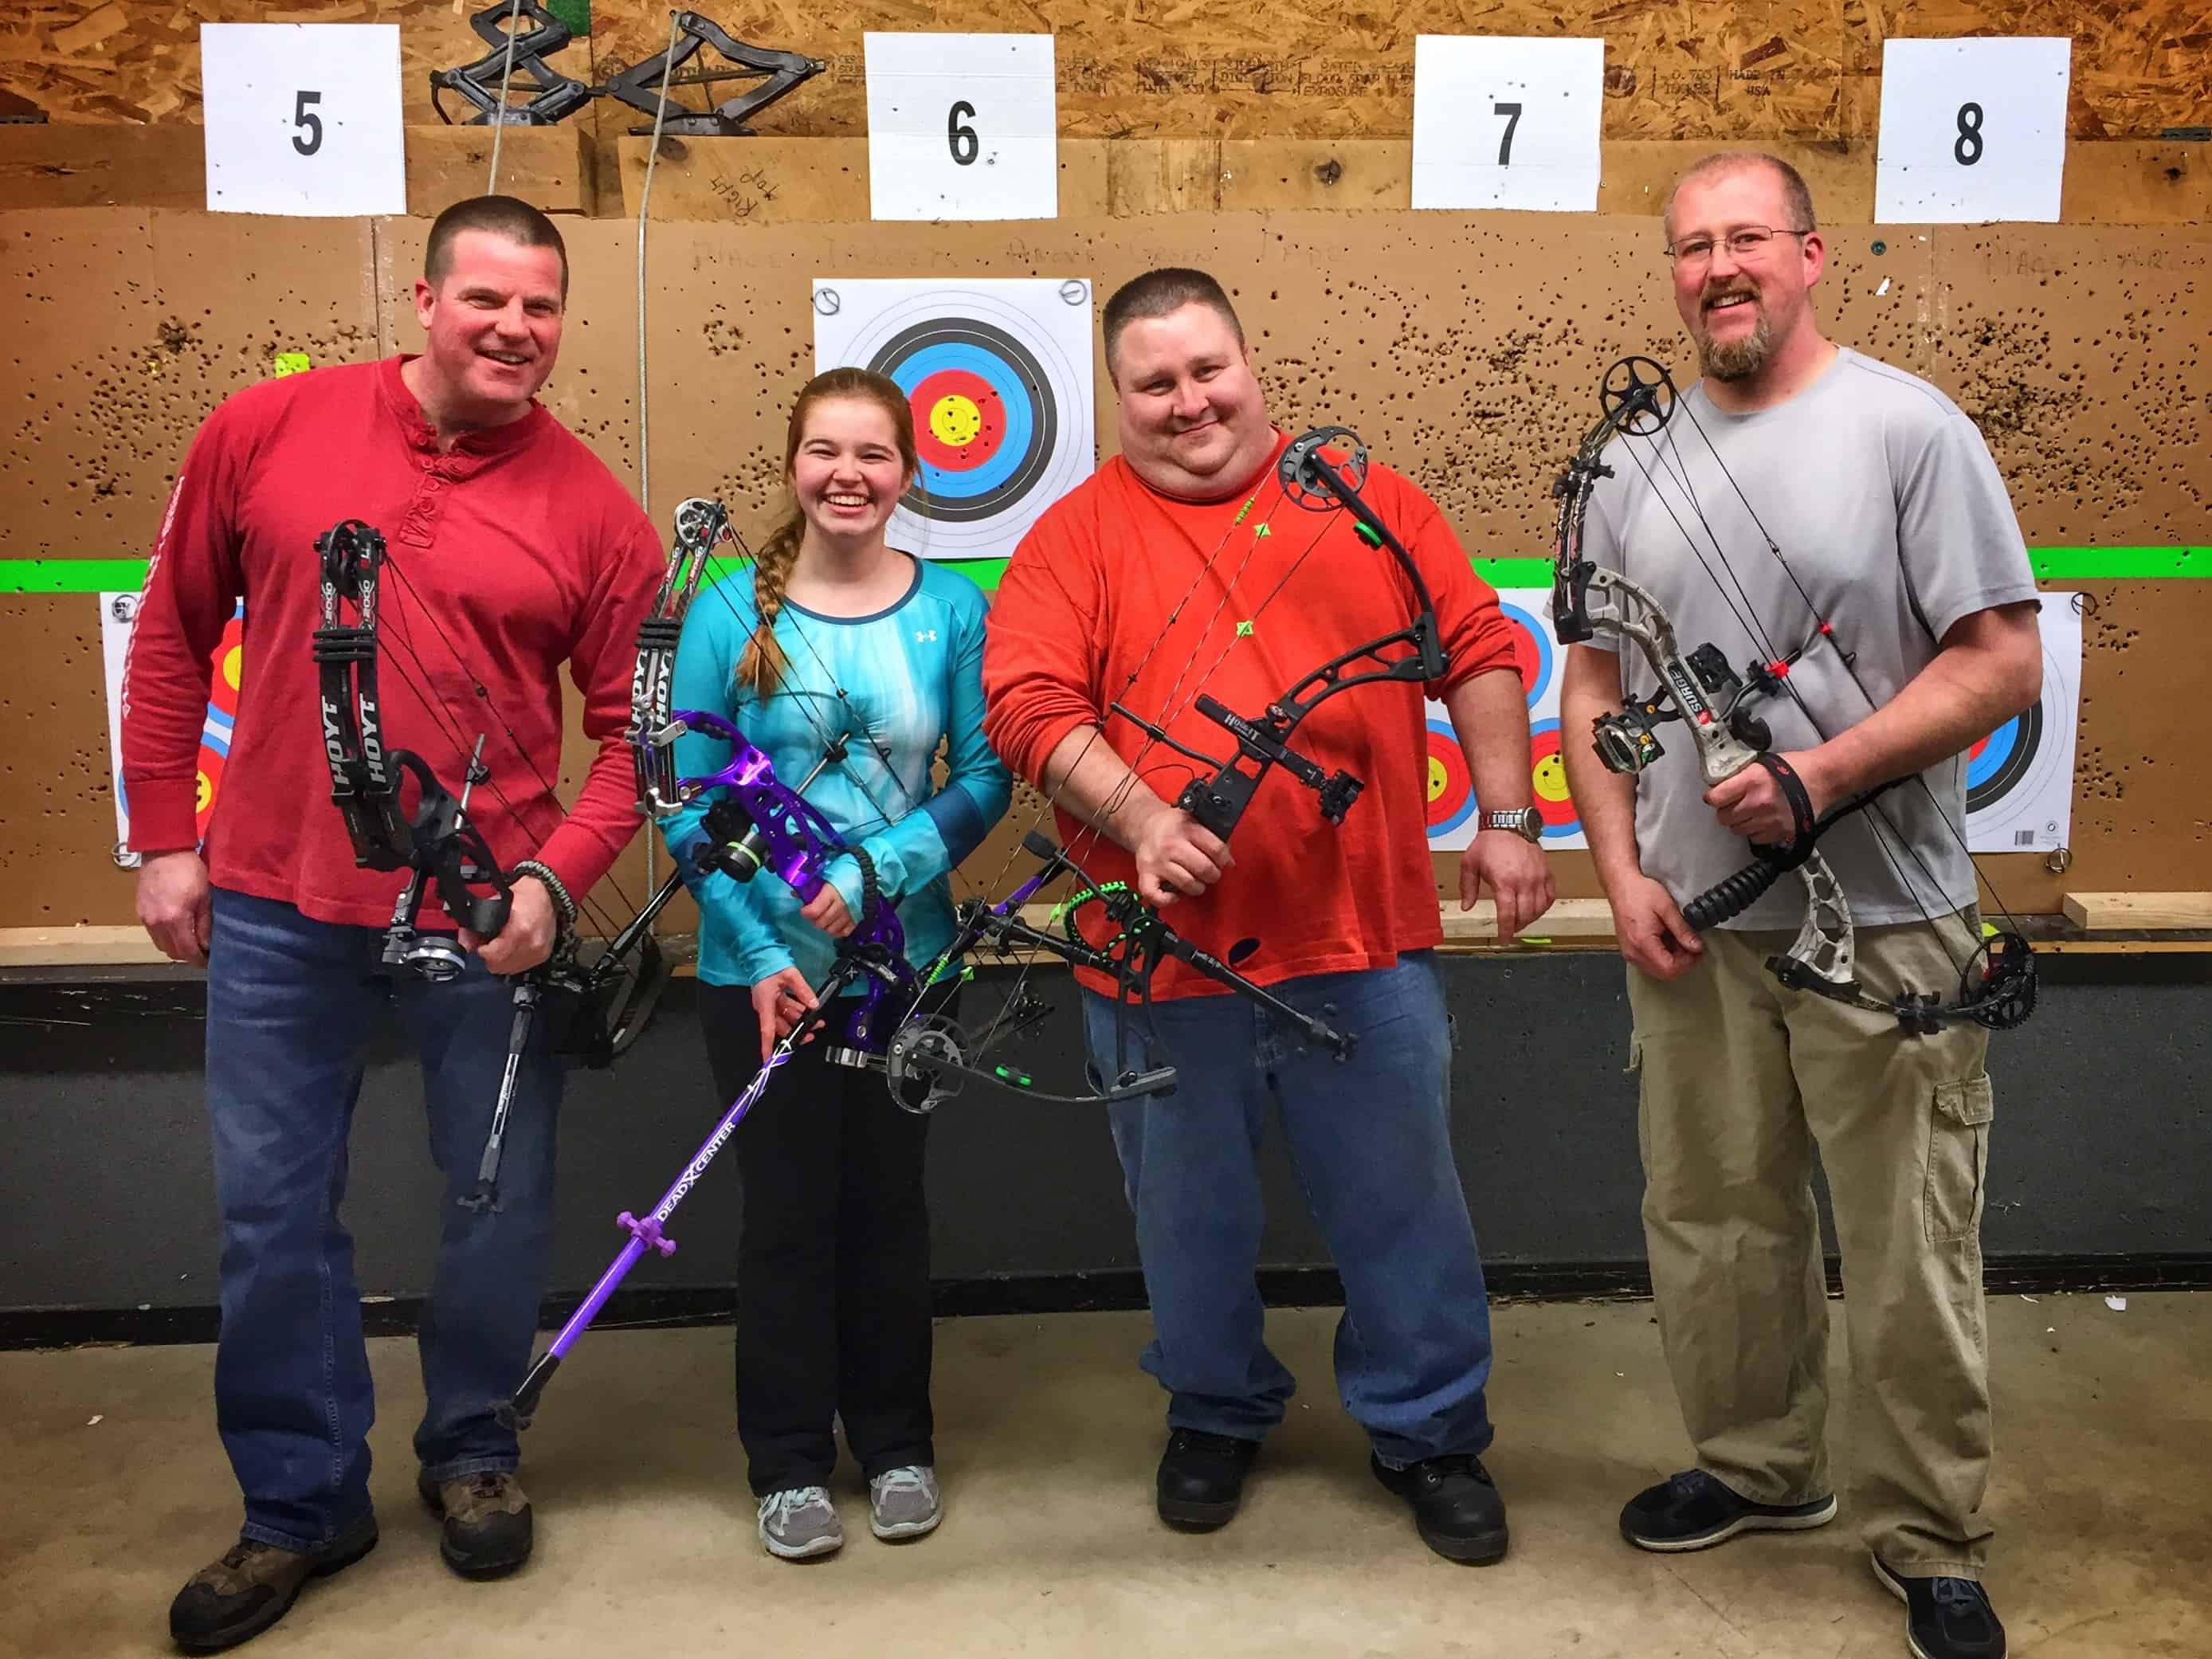 2015 Stowe Archers 450 League Champions - Bill, Amanda, Steve, and Ben (Left to Right)